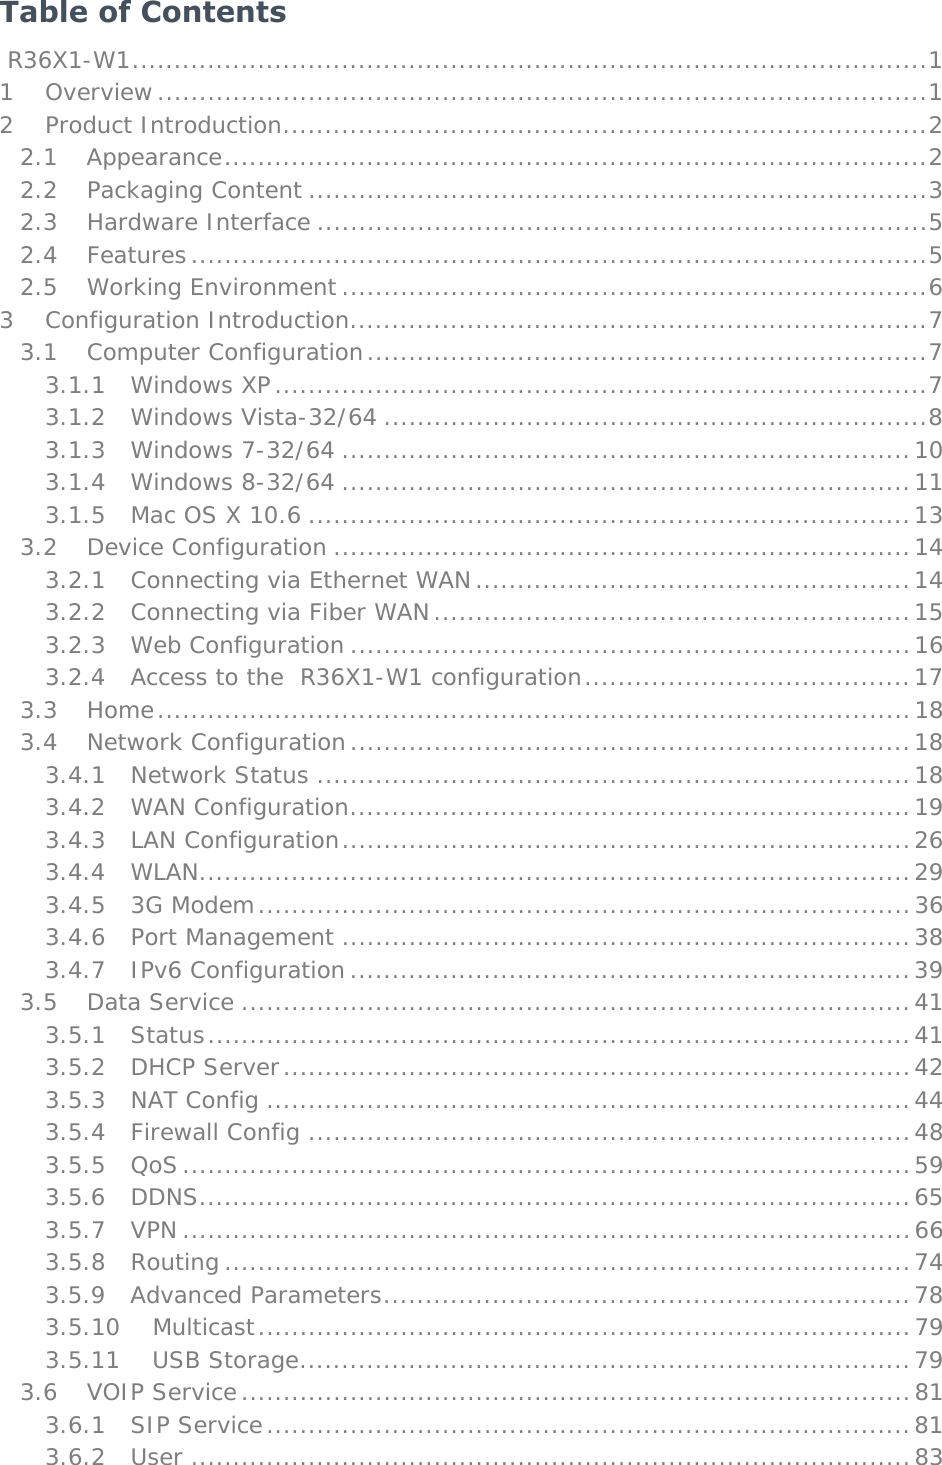   Table of Contents  R36X1-W1 ............................................................................................... 1 1 Overview ............................................................................................ 1 2 Product Introduction ............................................................................. 2 2.1 Appearance .................................................................................... 2 2.2 Packaging Content .......................................................................... 3 2.3 Hardware Interface ......................................................................... 5 2.4 Features ........................................................................................ 5 2.5 Working Environment ...................................................................... 6 3 Configuration Introduction ..................................................................... 7 3.1 Computer Configuration ................................................................... 7 3.1.1 Windows XP .............................................................................. 7 3.1.2 Windows Vista-32/64 ................................................................. 8 3.1.3 Windows 7-32/64 .................................................................... 10 3.1.4 Windows 8-32/64 .................................................................... 11 3.1.5  Mac OS X 10.6 ........................................................................ 13 3.2 Device Configuration ..................................................................... 14 3.2.1  Connecting via Ethernet WAN .................................................... 14 3.2.2  Connecting via Fiber WAN ......................................................... 15 3.2.3 Web Configuration ................................................................... 16 3.2.4  Access to the  R36X1-W1 configuration ....................................... 17 3.3 Home .......................................................................................... 18 3.4 Network Configuration ................................................................... 18 3.4.1 Network Status ....................................................................... 18 3.4.2 WAN Configuration ................................................................... 19 3.4.3 LAN Configuration .................................................................... 26 3.4.4 WLAN ..................................................................................... 29 3.4.5 3G Modem .............................................................................. 36 3.4.6 Port Management .................................................................... 38 3.4.7 IPv6 Configuration ................................................................... 39 3.5 Data Service ................................................................................ 41 3.5.1 Status .................................................................................... 41 3.5.2 DHCP Server ........................................................................... 42 3.5.3 NAT Config ............................................................................. 44 3.5.4 Firewall Config ........................................................................ 48 3.5.5 QoS ....................................................................................... 59 3.5.6 DDNS ..................................................................................... 65 3.5.7 VPN ....................................................................................... 66 3.5.8 Routing .................................................................................. 74 3.5.9 Advanced Parameters ............................................................... 78 3.5.10 Multicast .............................................................................. 79 3.5.11 USB Storage ......................................................................... 79 3.6 VOIP Service ................................................................................ 81 3.6.1 SIP Service ............................................................................. 81 3.6.2 User ...................................................................................... 83 